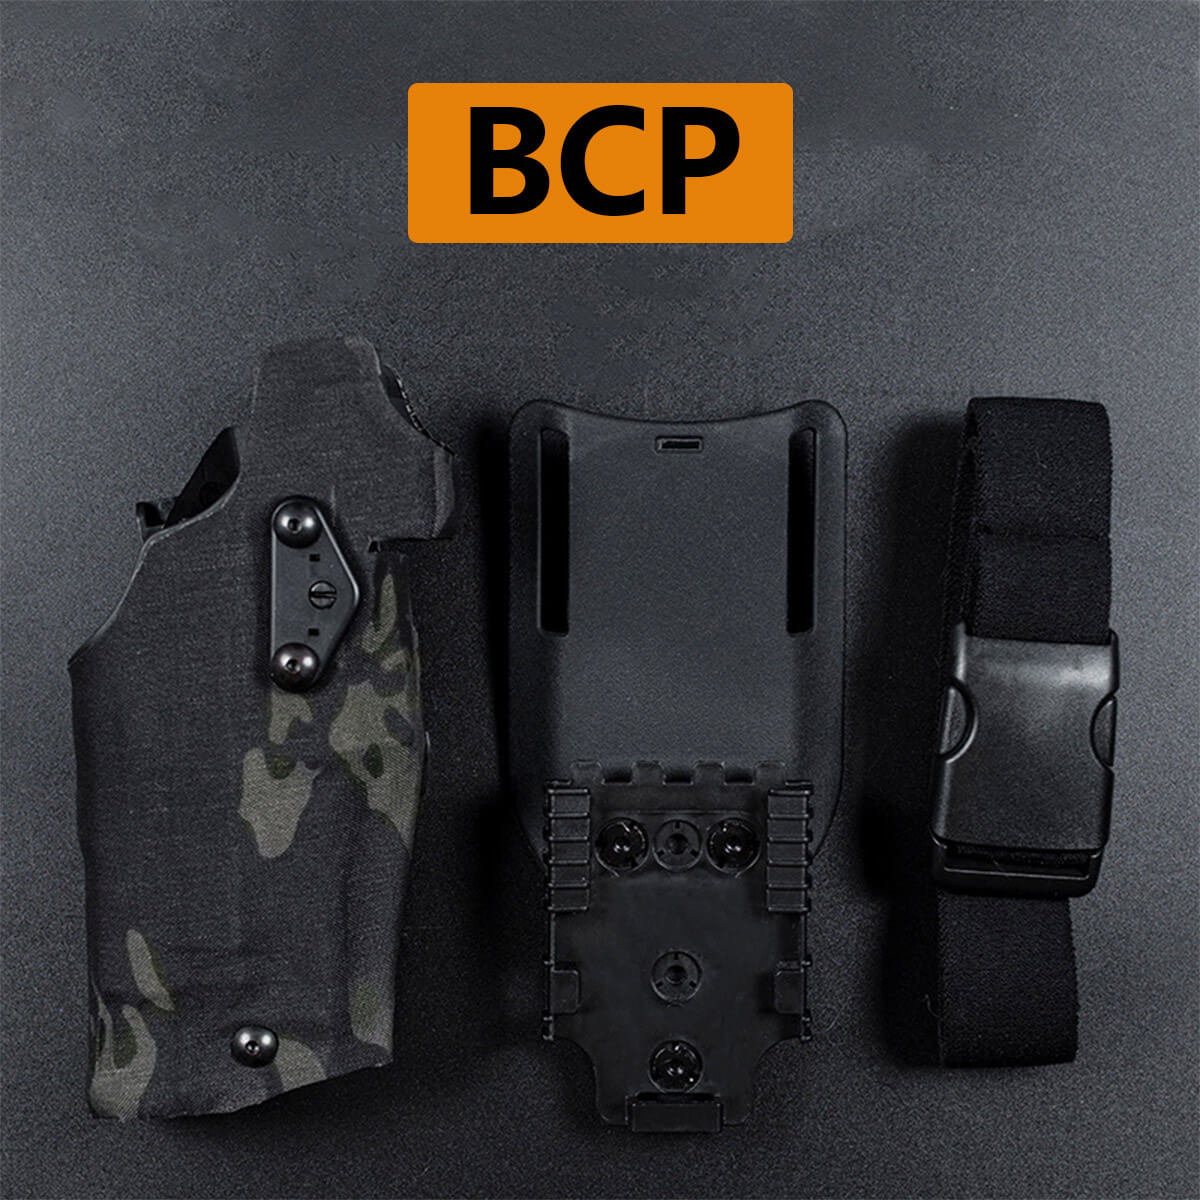 6354DO Tactical Universal Quick Release Gun Holster Pistol Carry Case For Glock 17 19 with X300 X300U Airsoft Weapon Flashlight-Tactical Accessories-Kublai-black cp-Kublai